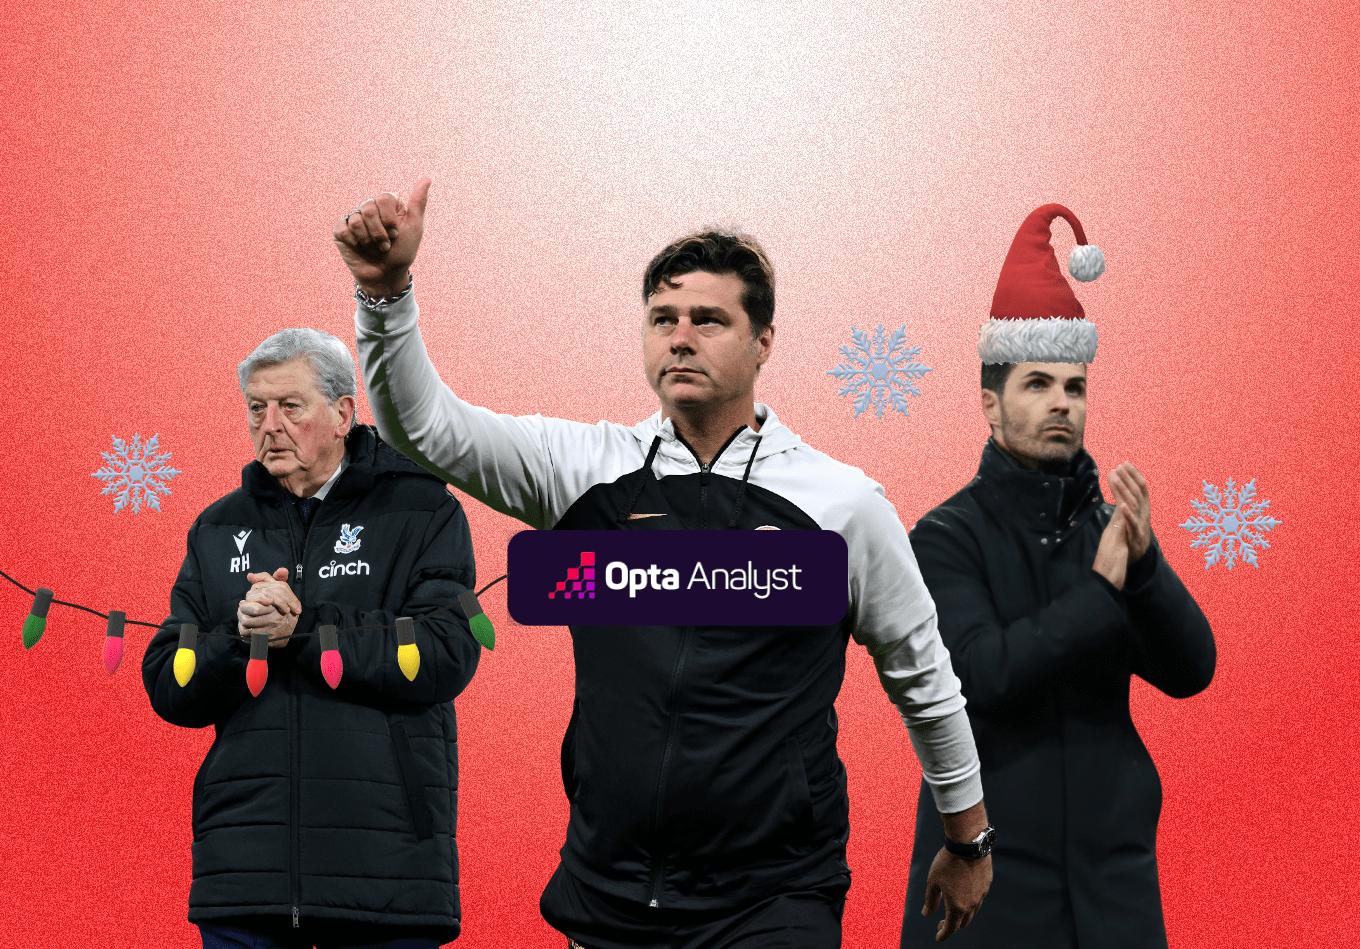 Premier League Fixture Difficulty: Who Has the Hardest and Easiest Christmas Games?